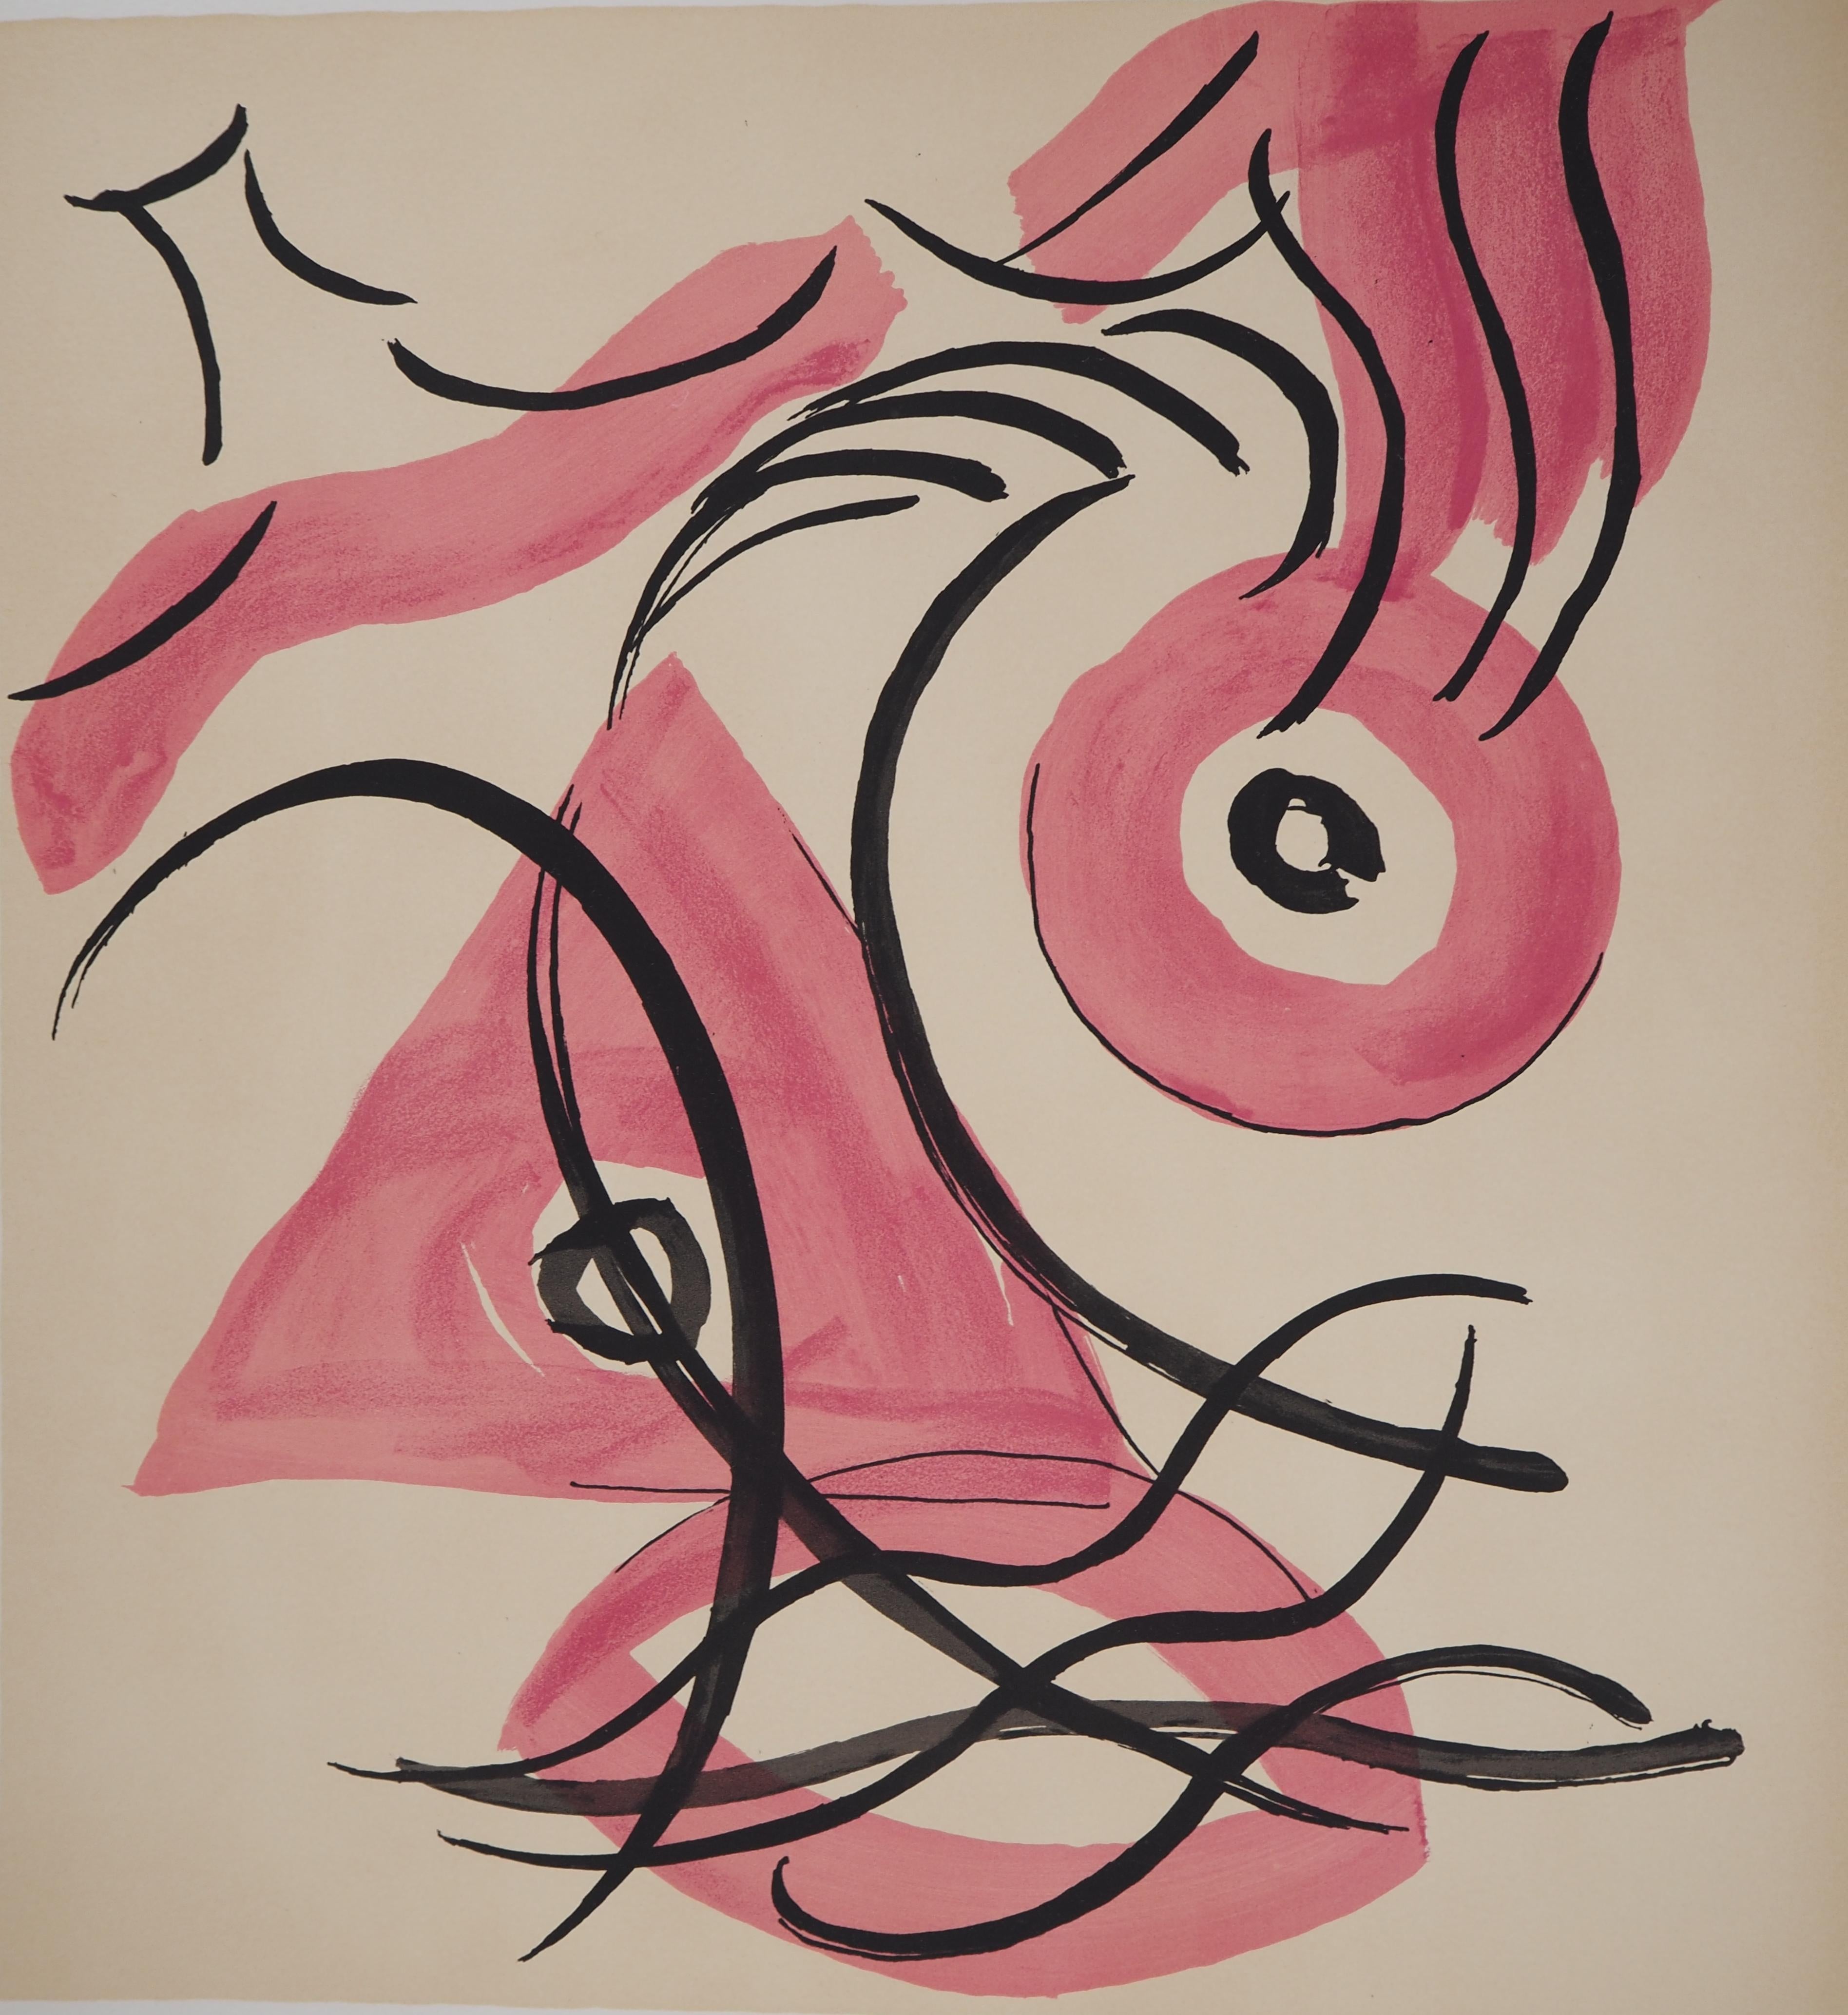 Man RAY (Emmanuel Radnitsky, aka)
Surrealist Expression, 1971

Original lithograph
Handsigned in pencil
Numbered / 180 
On Arches vellum, 51 x 36 cm (c. 20 x 14,1 inch)

REFERENCE : Catalogue raisonne Anselmino #58
This lithograph is part of the set